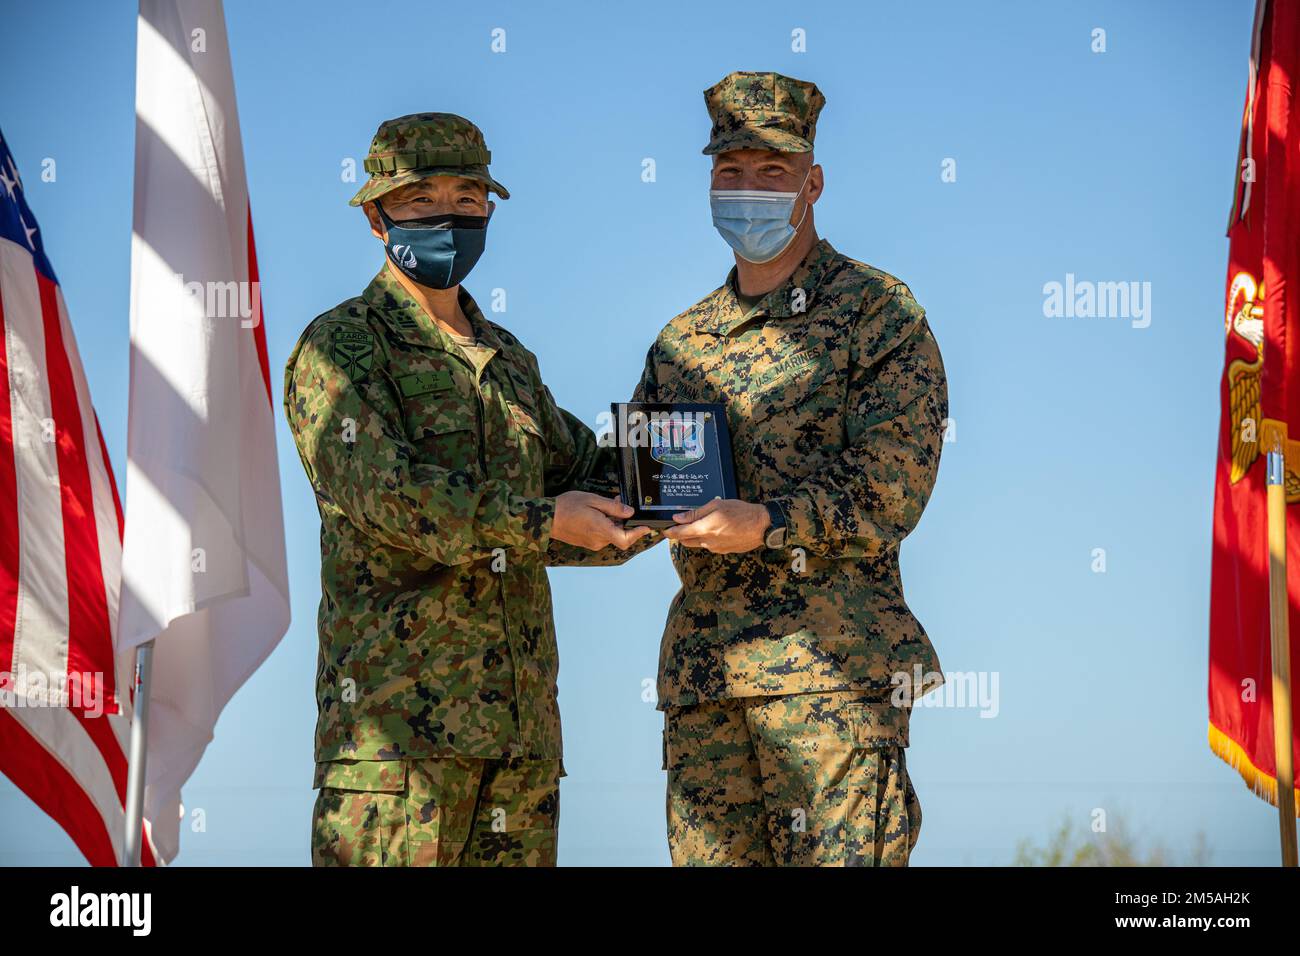 Japan Ground Self-Defense Force (JGSDF) Col. Kazuhiro Irie, commanding officer of the 2nd Amphibious Rapid Deployment Regiment, left, gifts a plaque in honor of exercise Iron Fist 2022 to U.S. Marine Corps Col. Sean Dynan, commanding officer of the 15th Marine Expeditionary Unit during the closing ceremony at Marine Corps Base Camp Pendleton, California, Feb. 16, 2022. For almost two decades the U.S. Marine Corps, U.S. Navy, and JGSDF have conducted exercise Iron Fist, training together in amphibious operations and affirming the U.S. commitment to our allies. Stock Photo